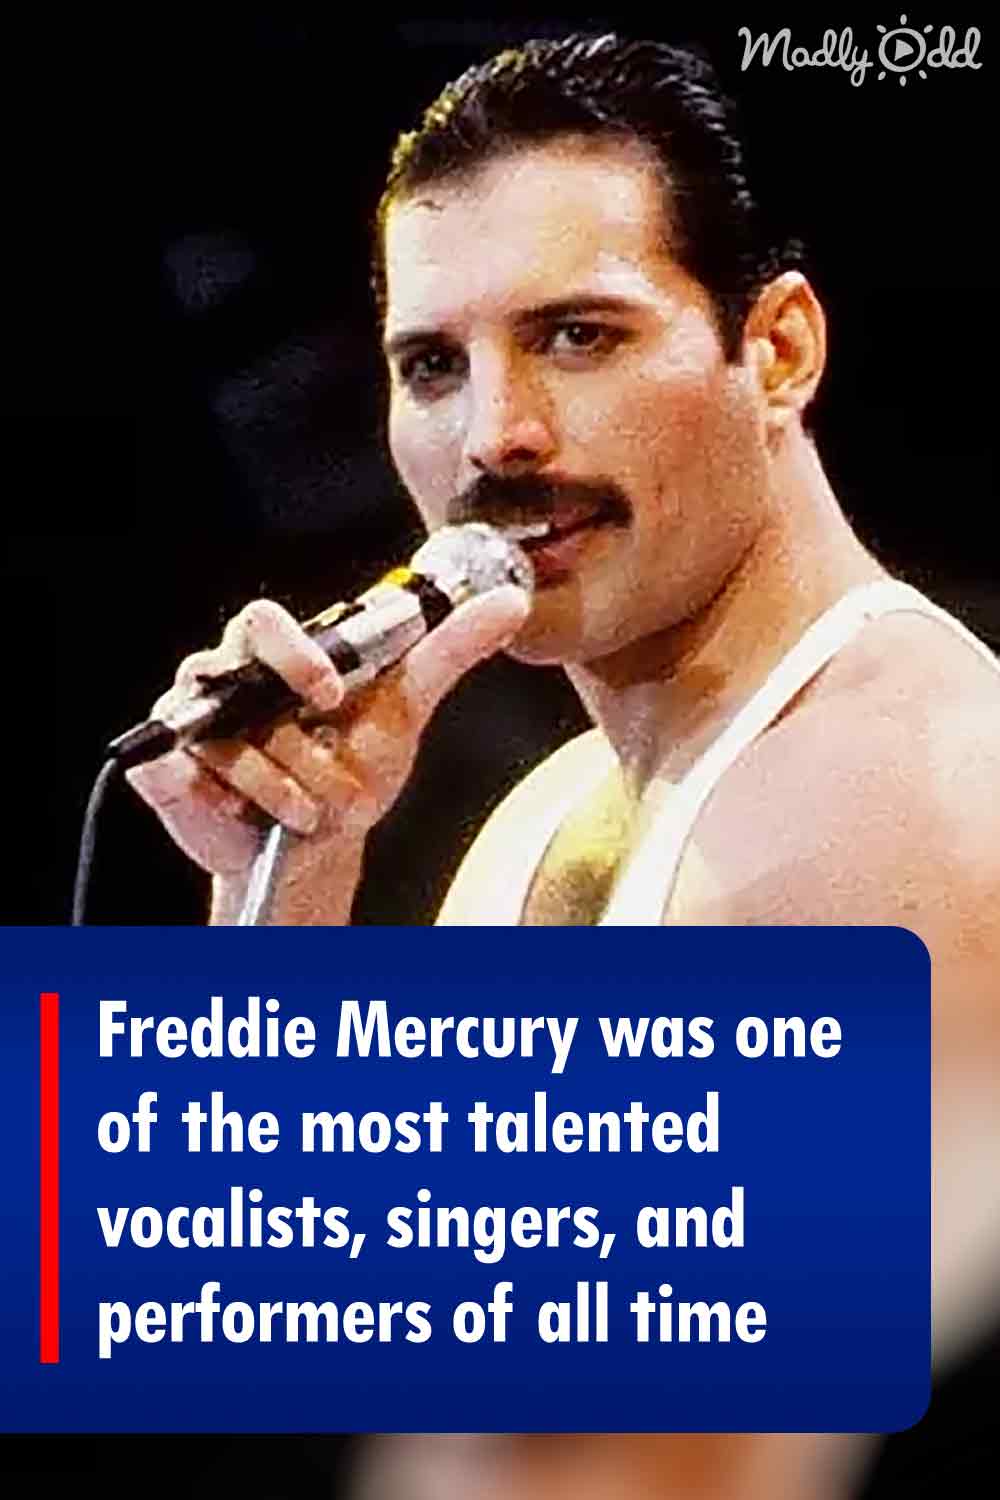 Freddie Mercury was one of the most talented vocalists, singers, and performers of all time